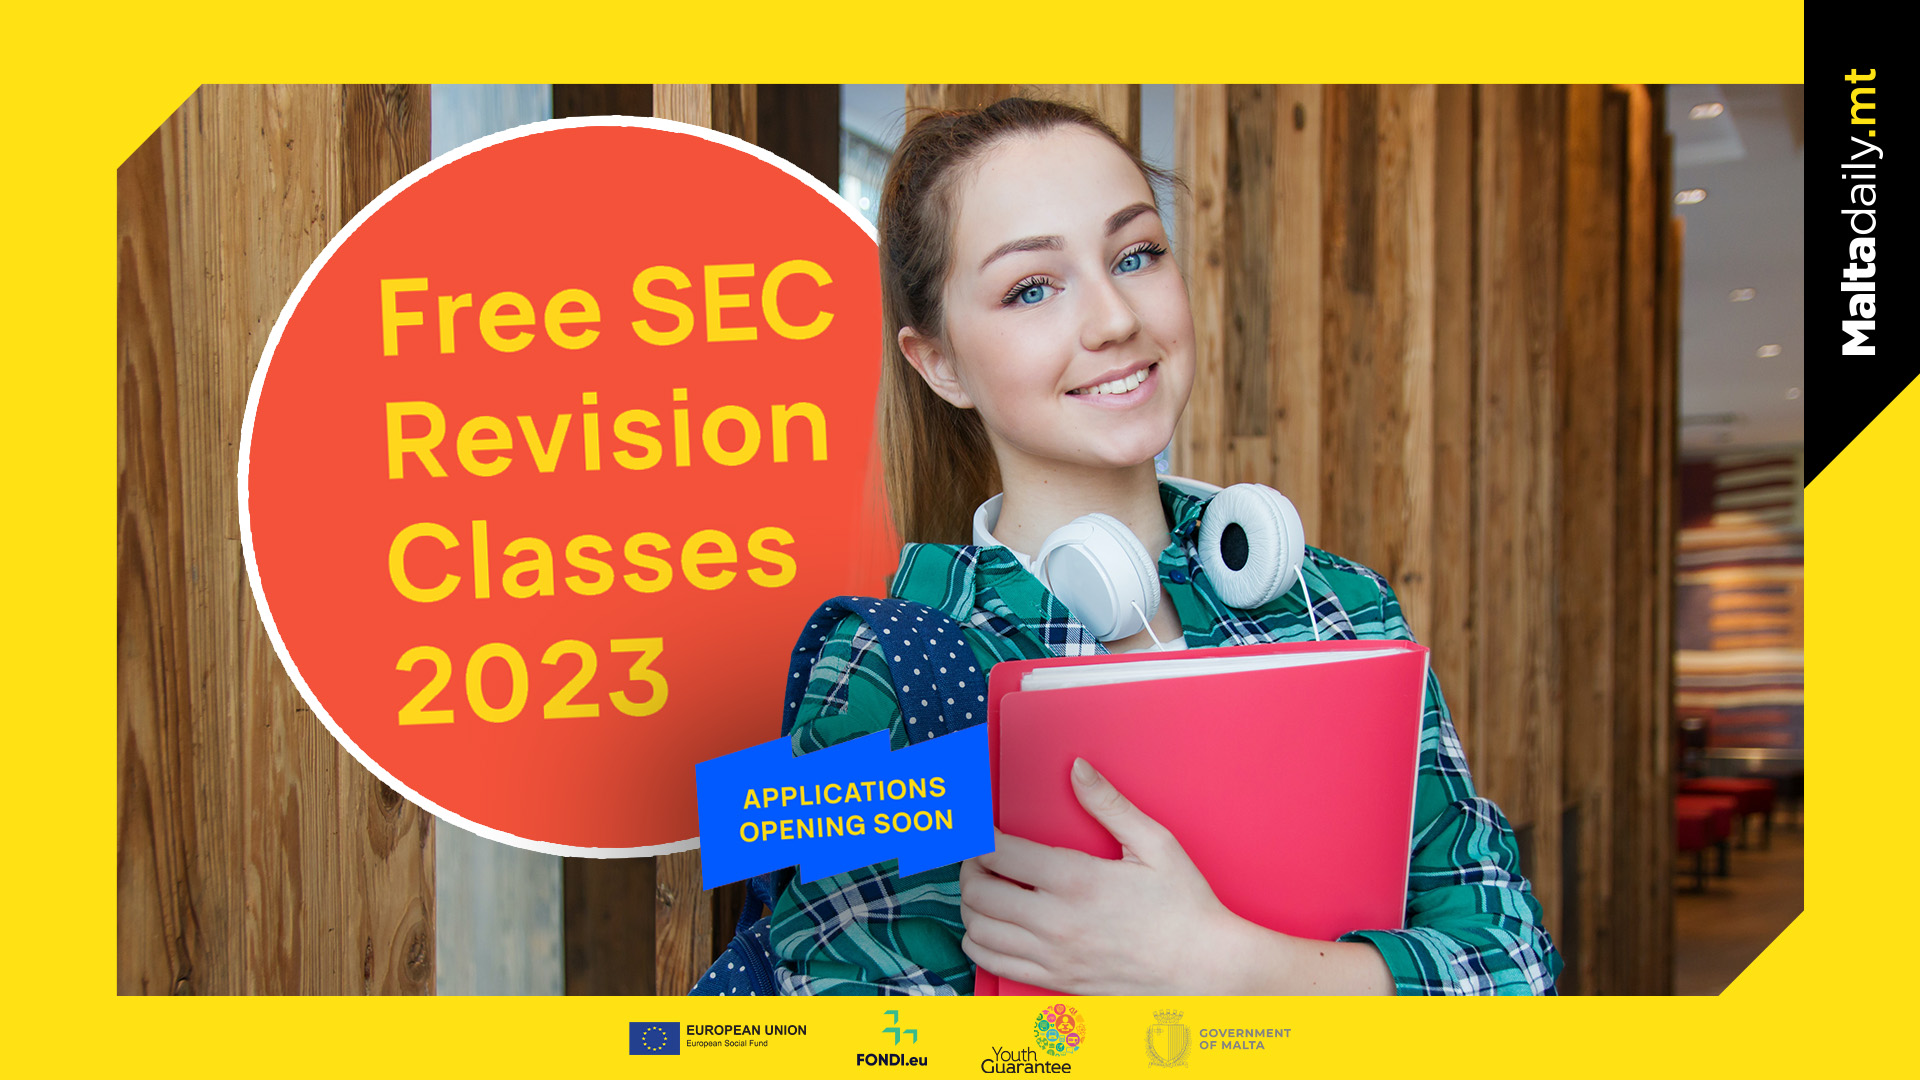 Resit Worries? Jobsplus Have Got You Sorted With FREE SEC Revision Classes